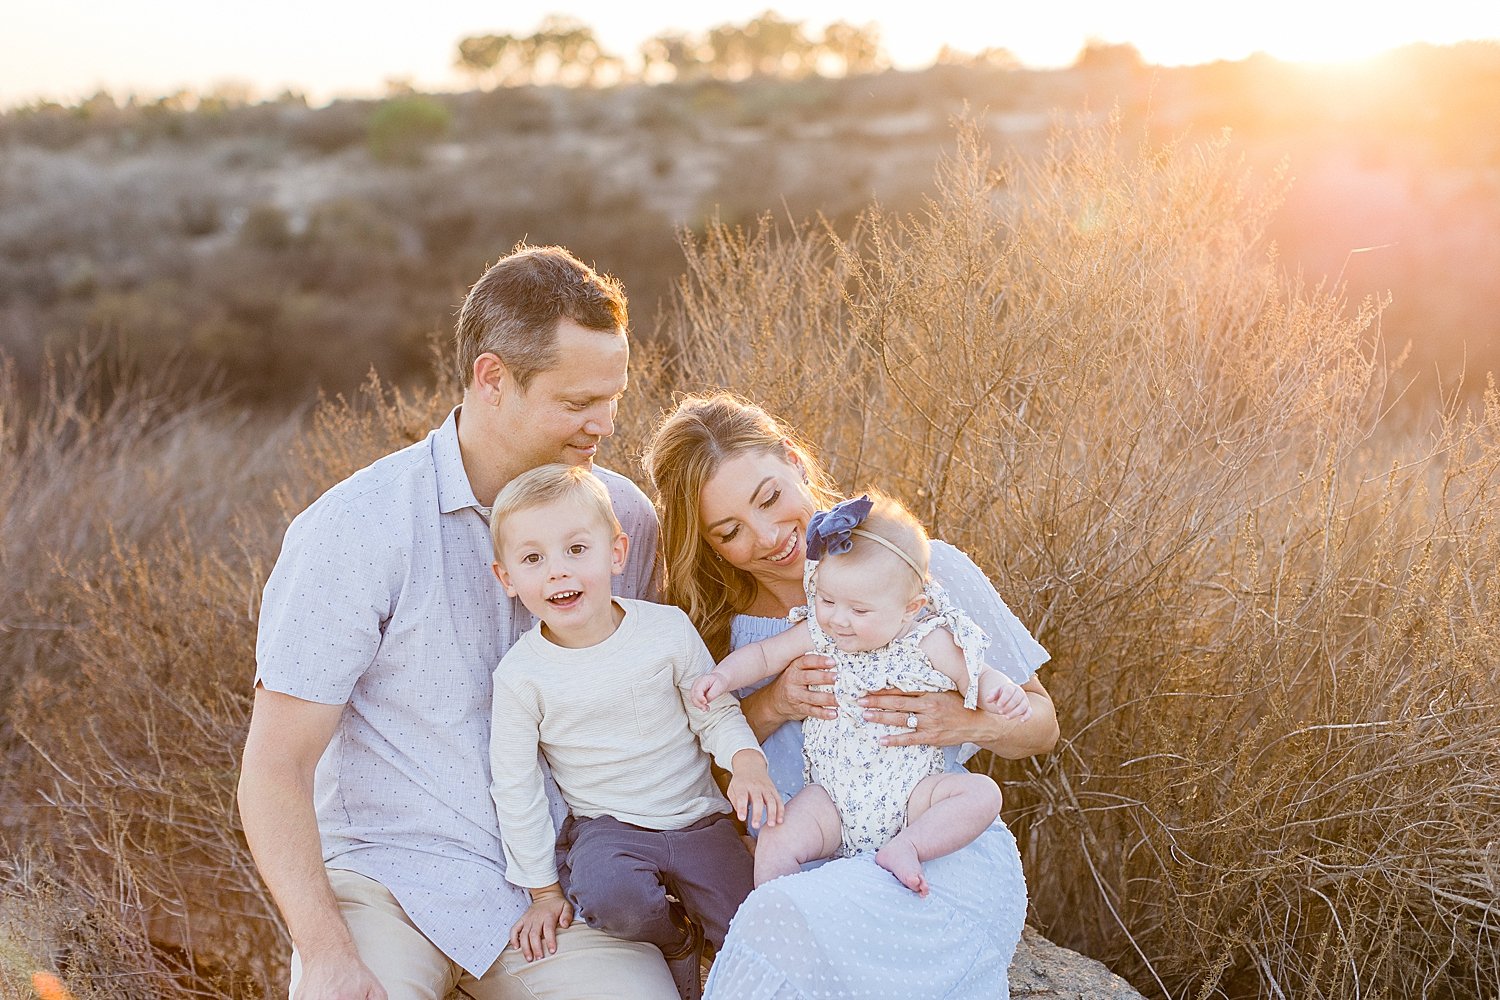 Family portrait at sunset | Ambre Williams Photography